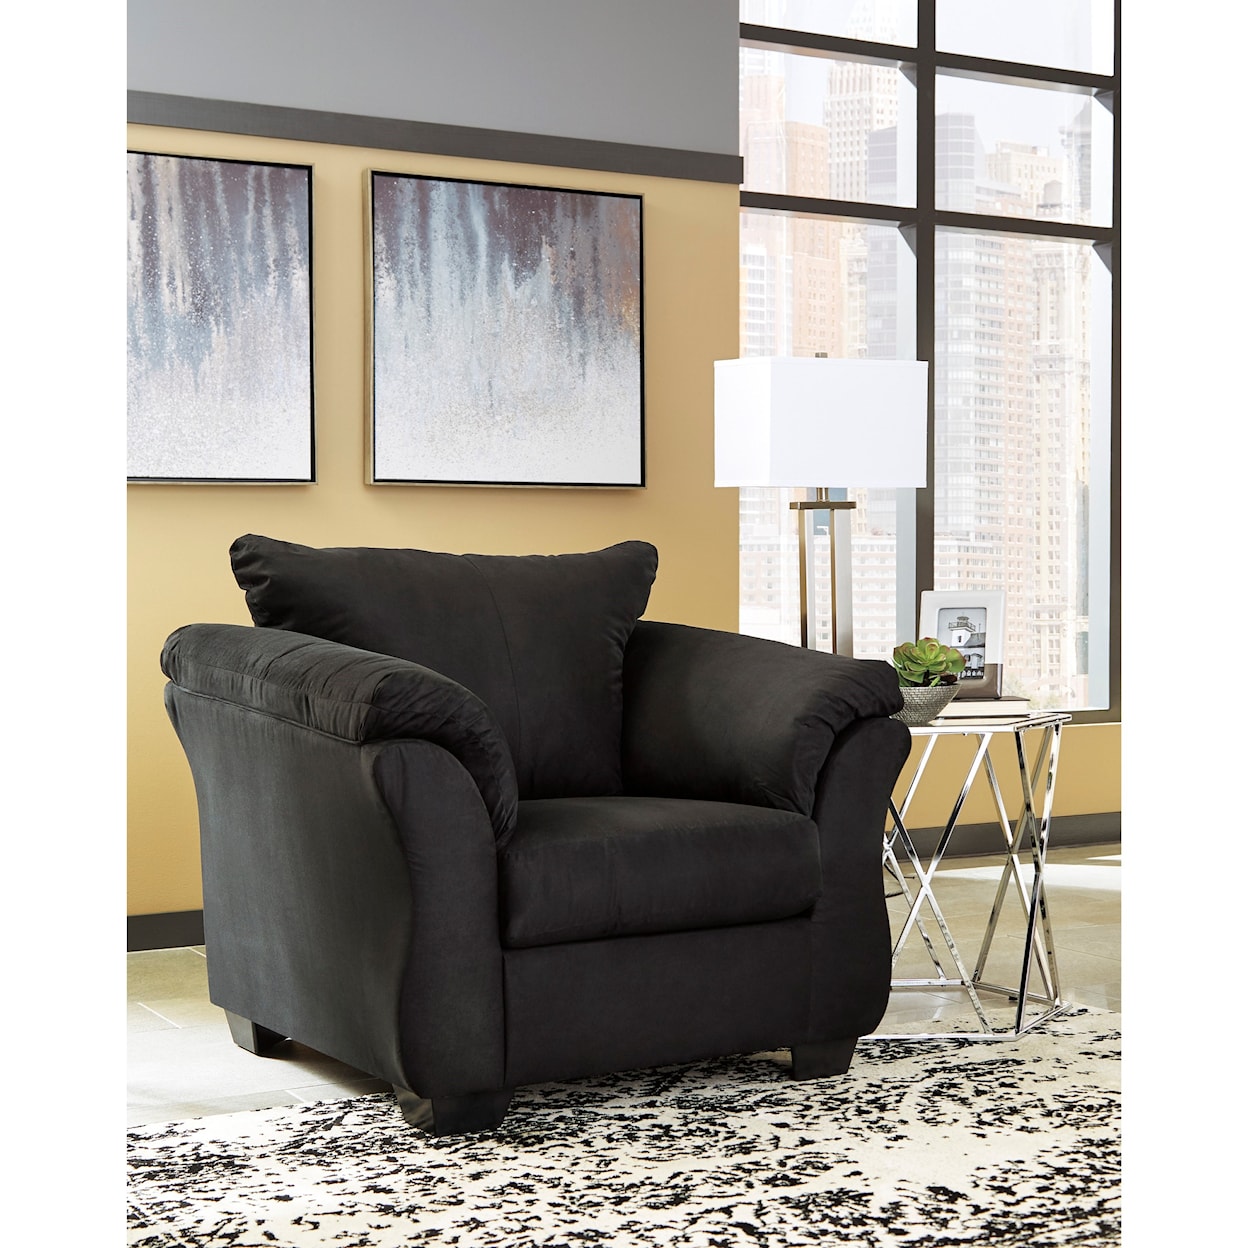 StyleLine Darcy Upholstered Chair